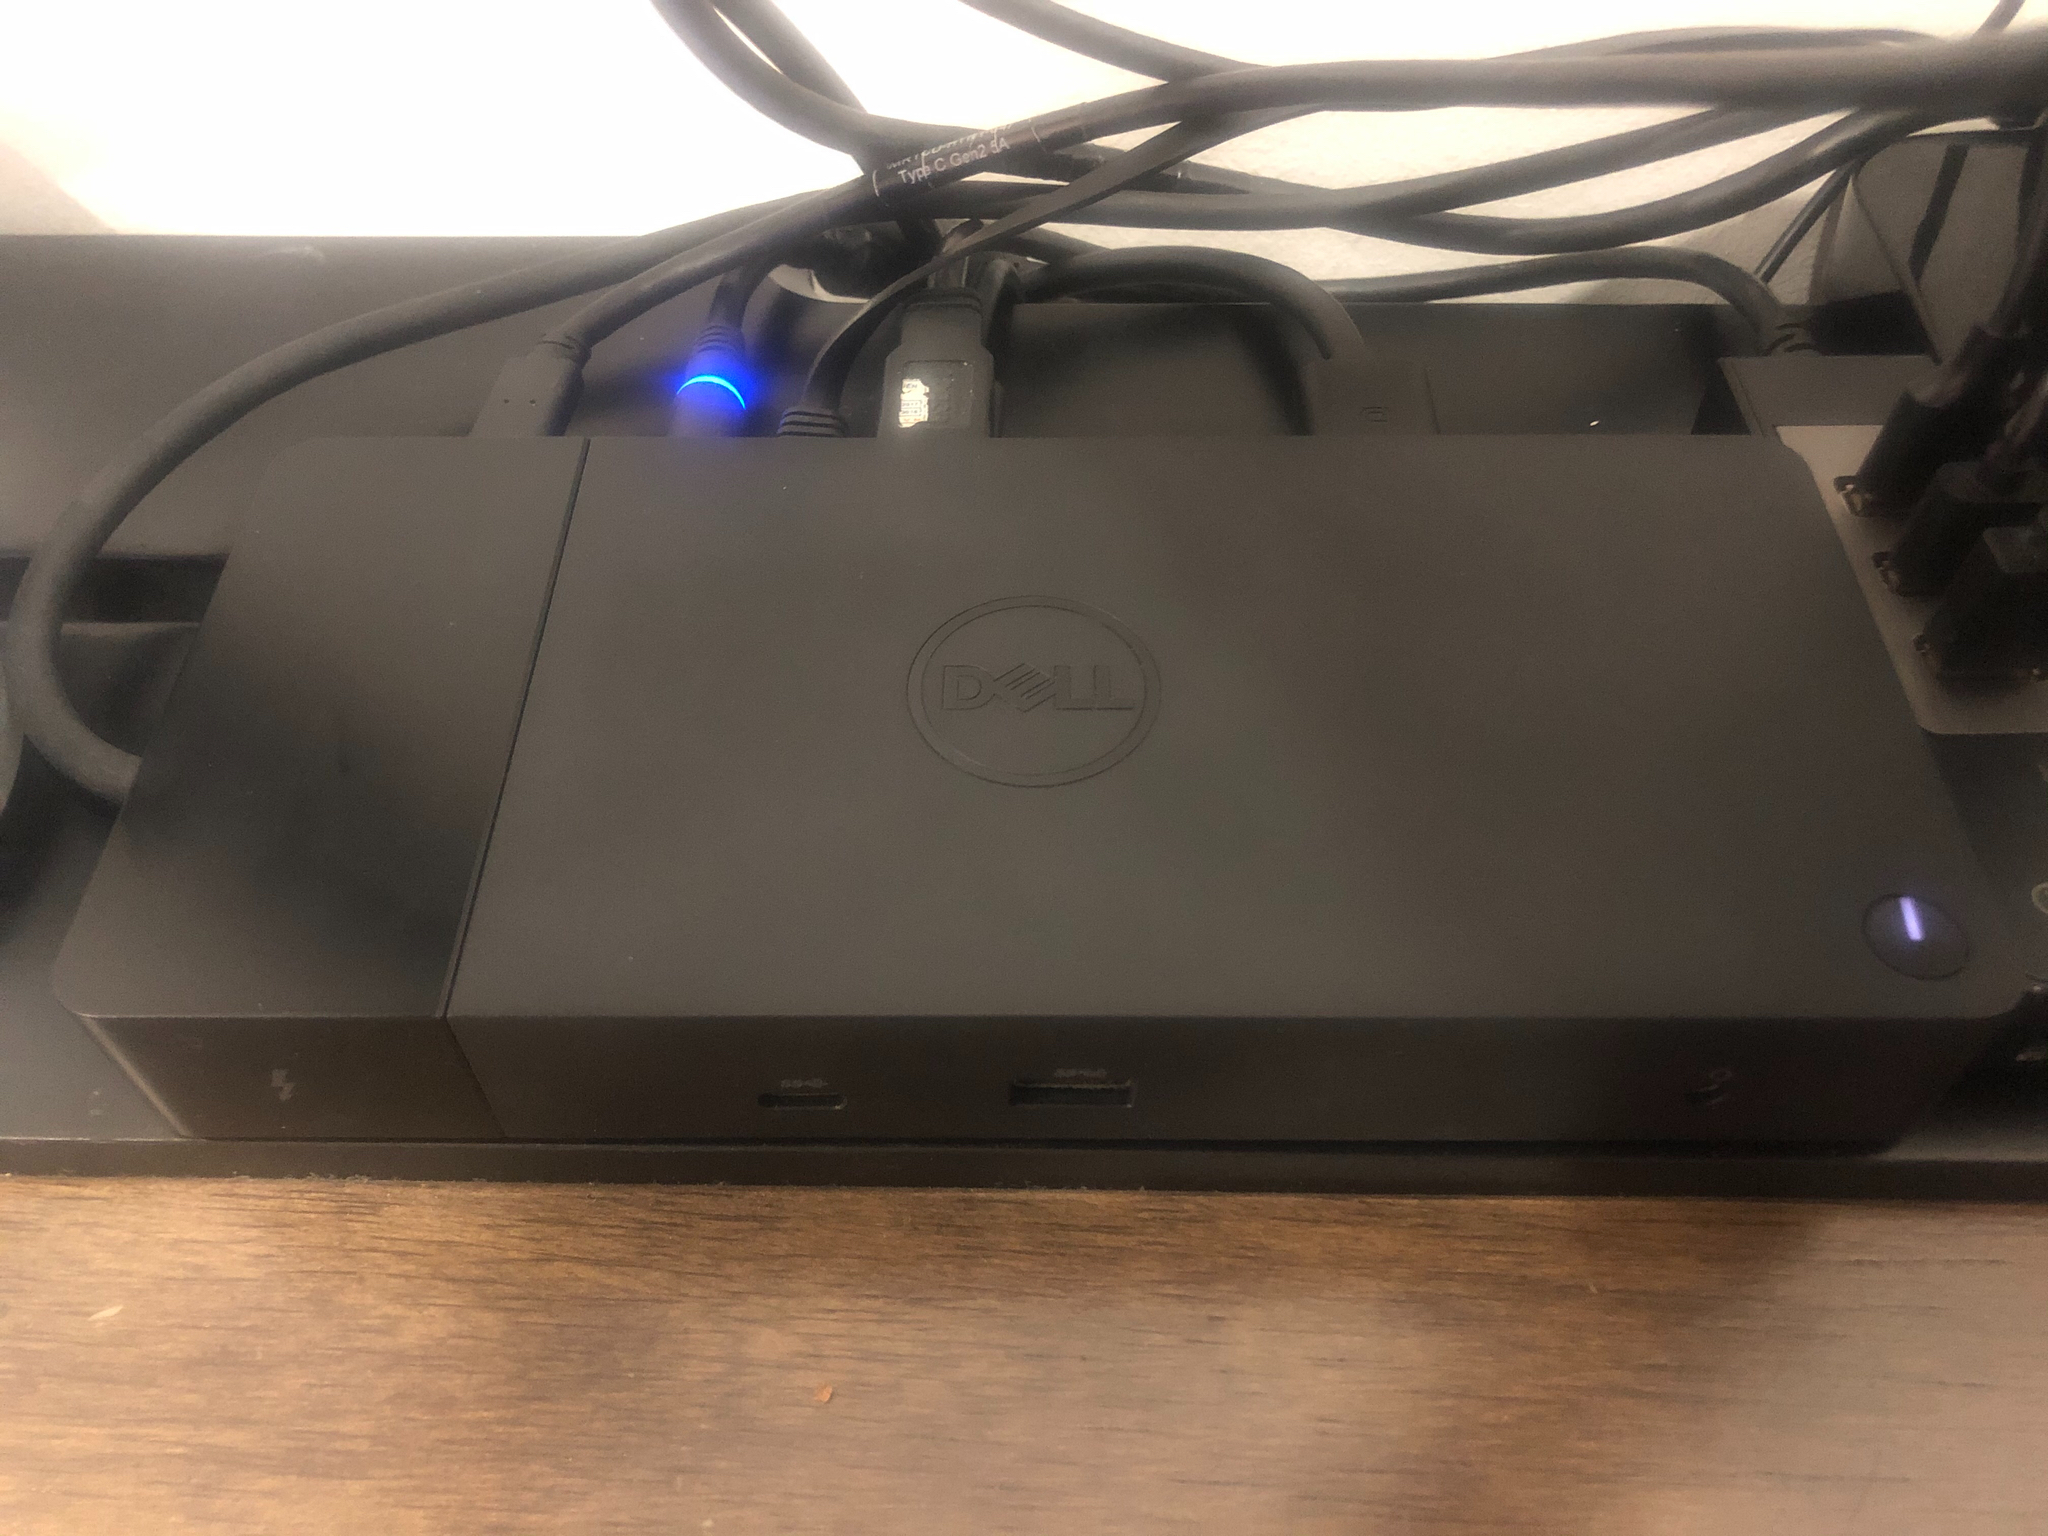 Review Thunderbolt 3 Dock - Dell WD19TB - Hoàn hảo cho Laptop Workstation